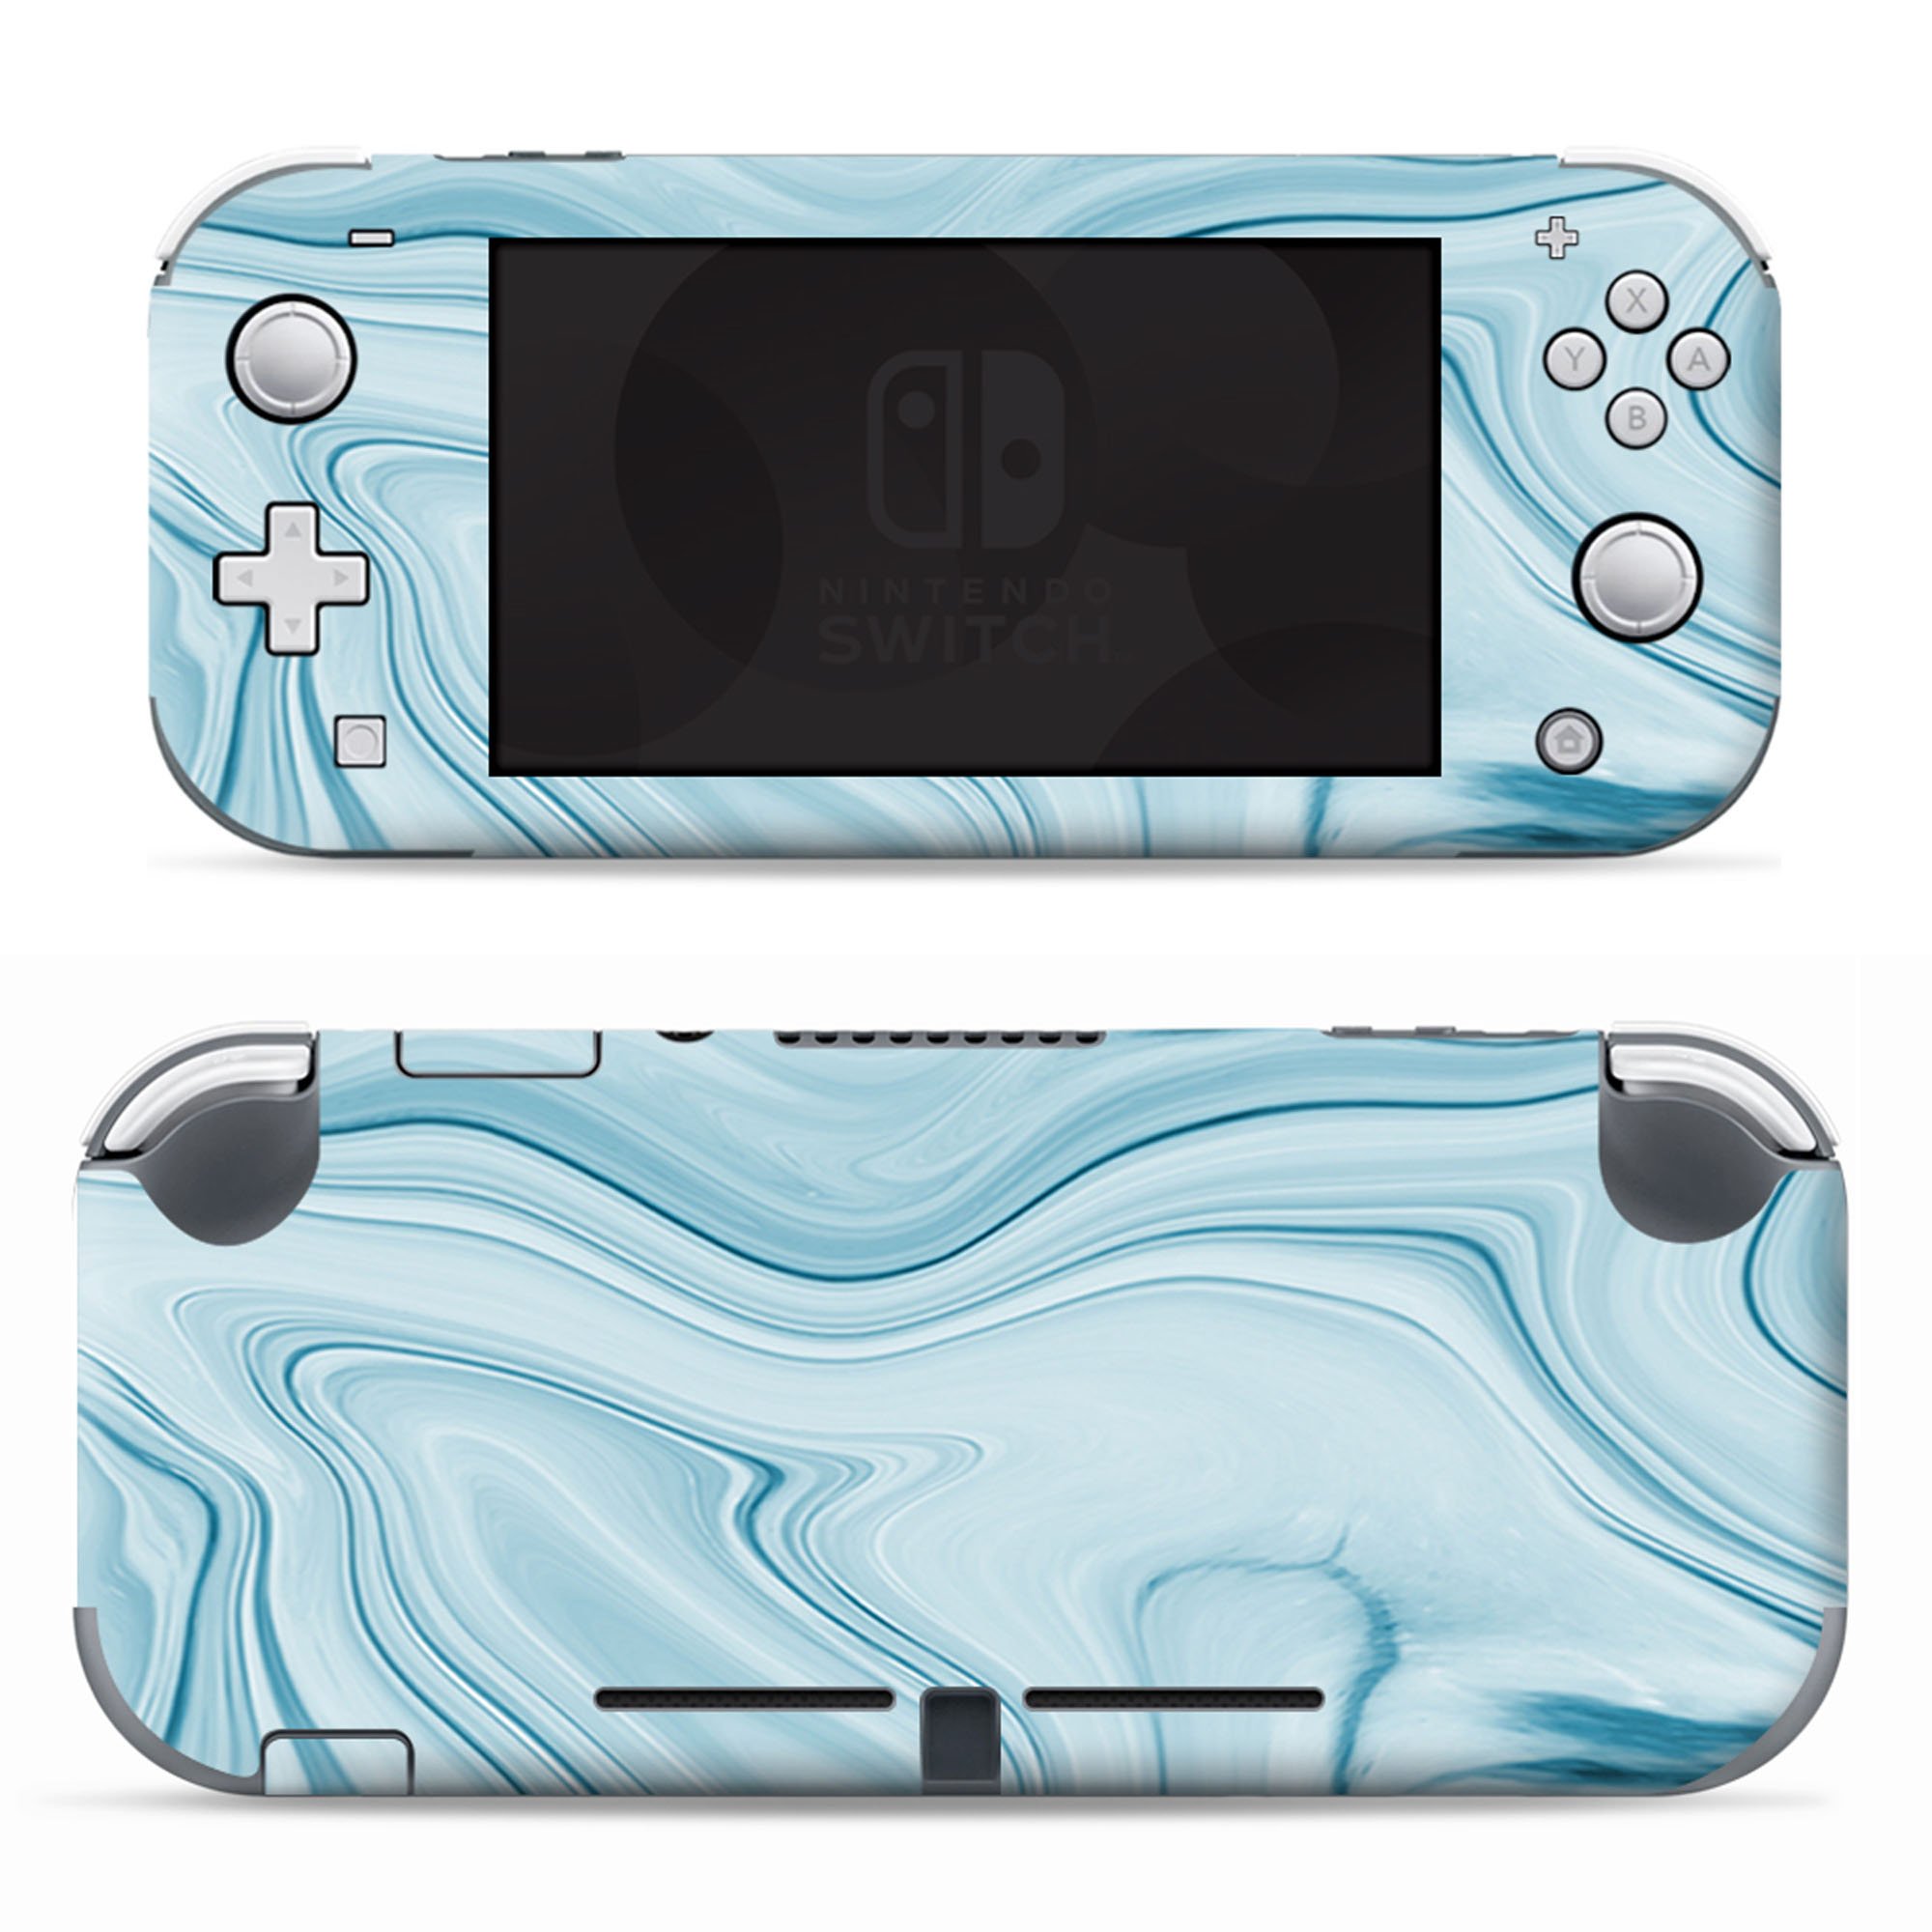 Nintendo Switch Lite Skins Decals Vinyl Wrap  - decal stickers skins cover -Baby Blue Ice Swirl Marble - image 1 of 4